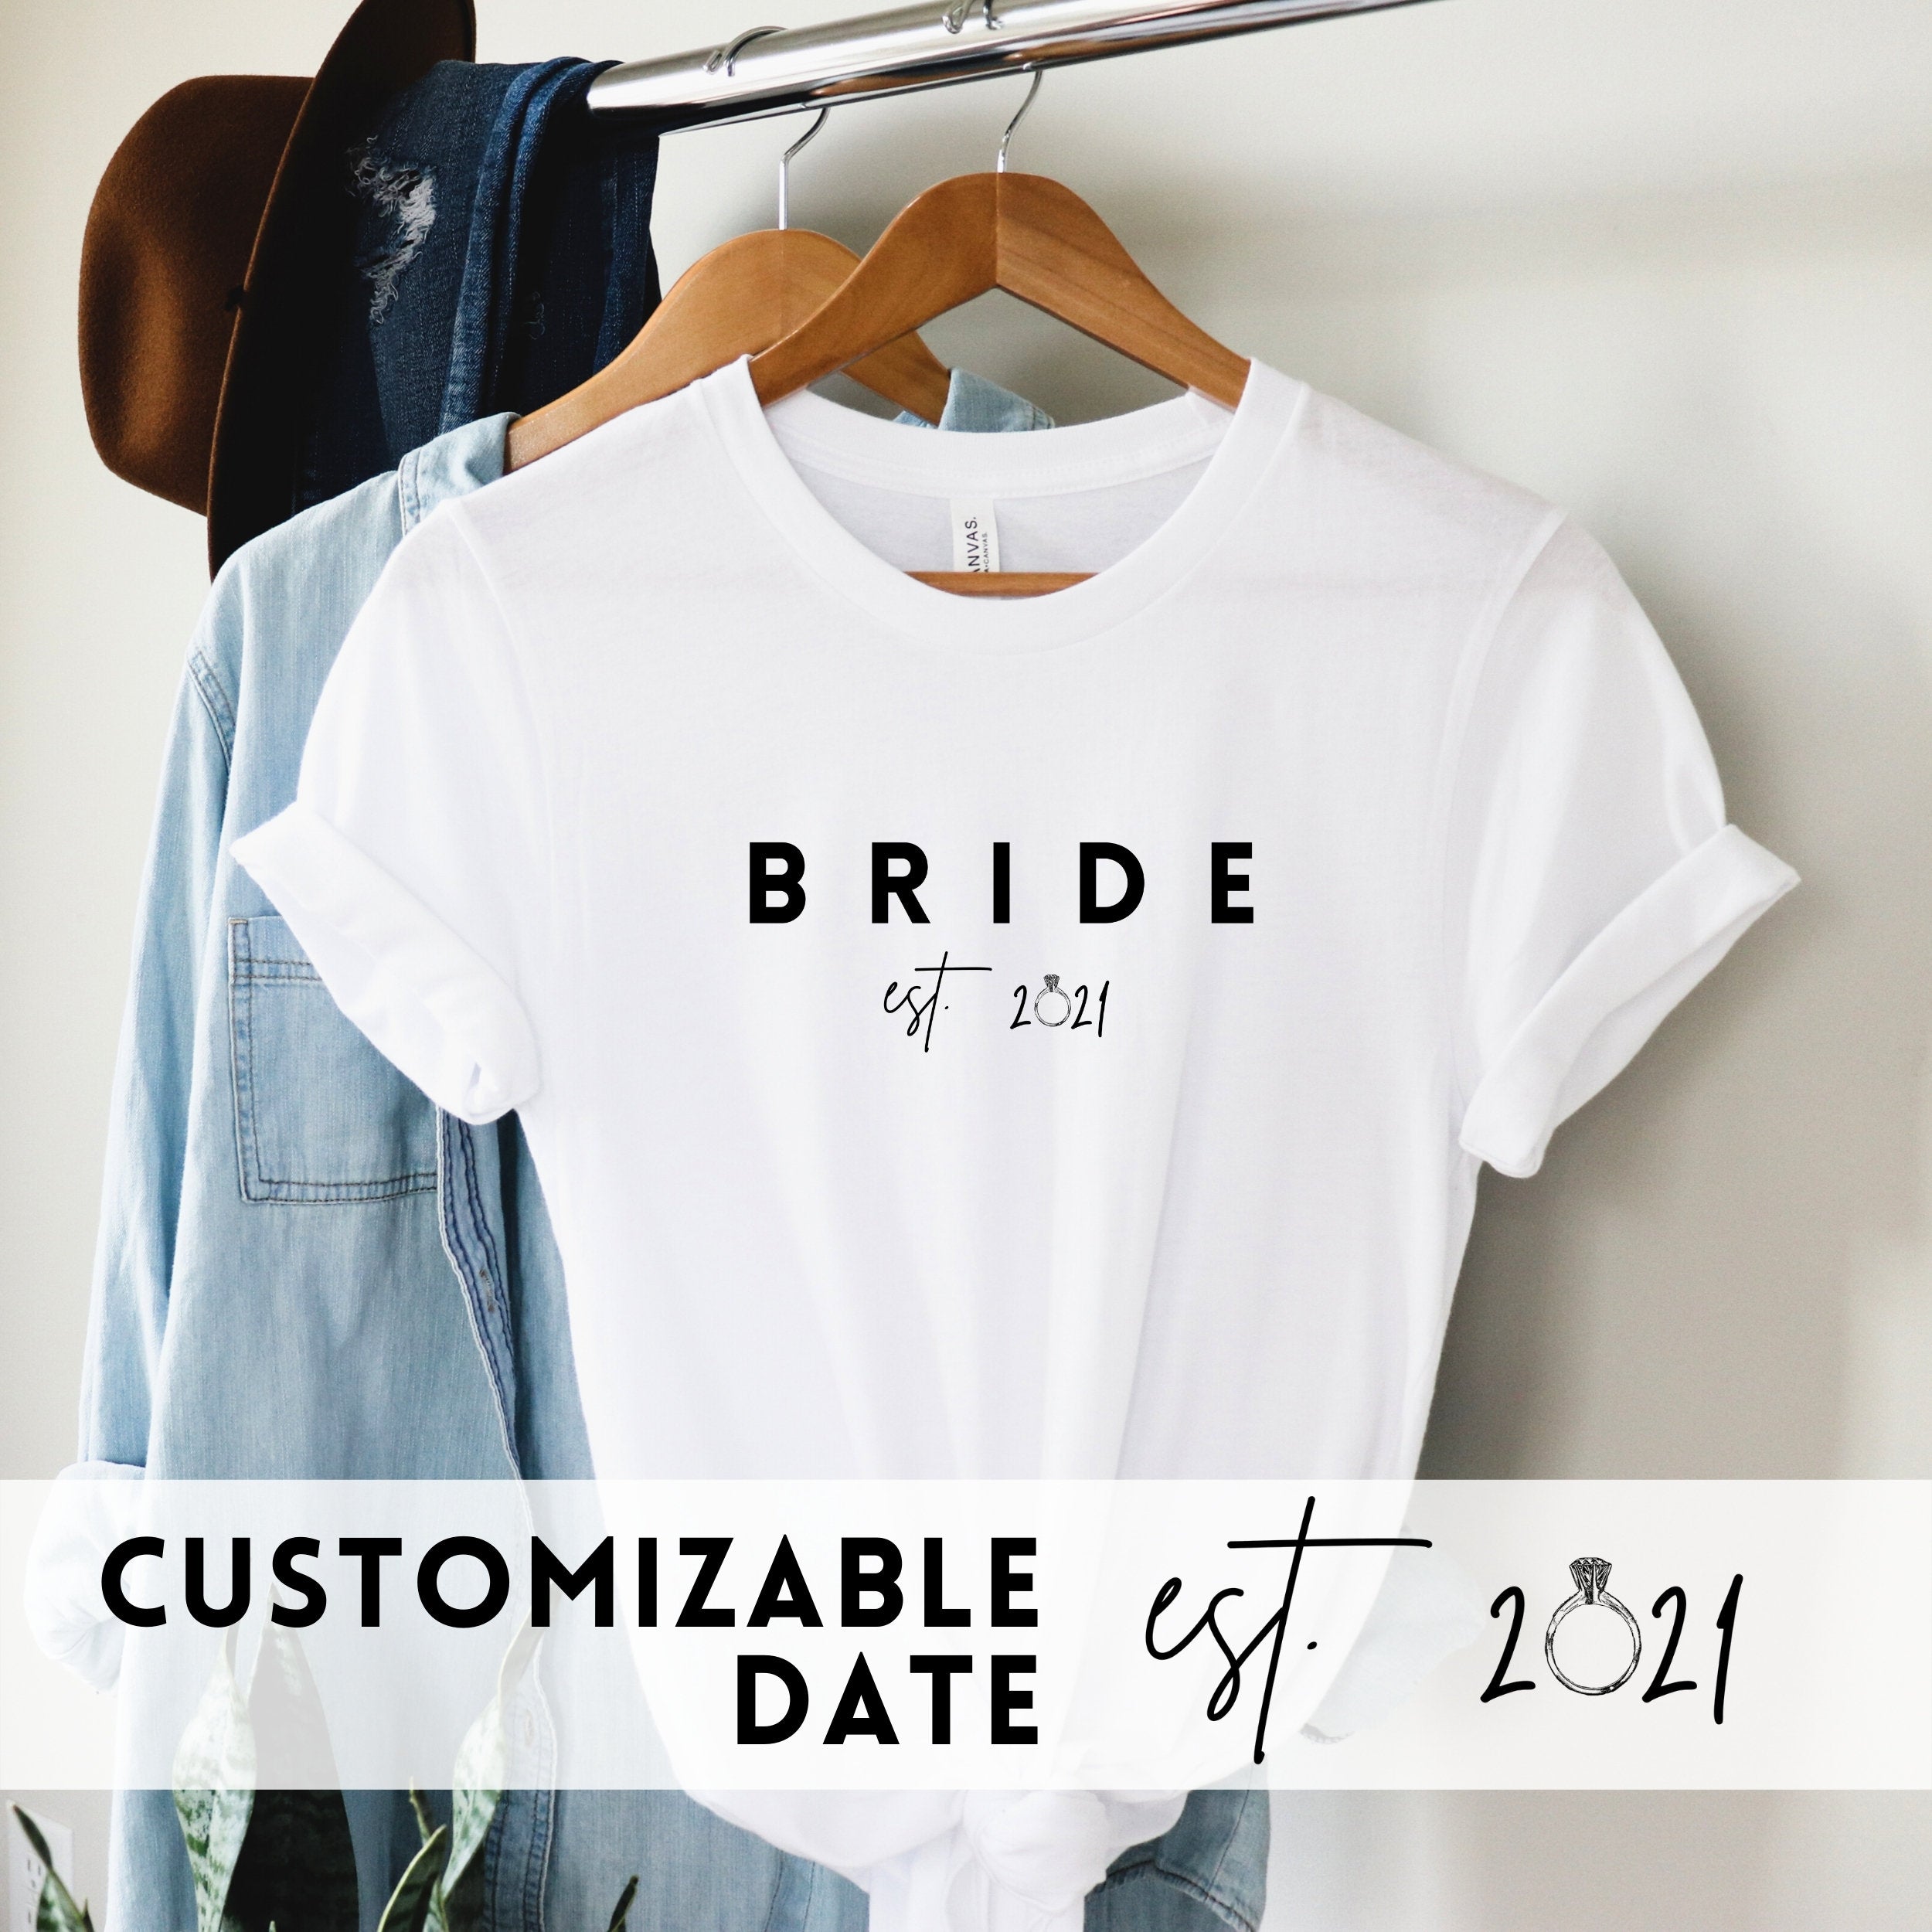 Family of the Bride Tee | Customized